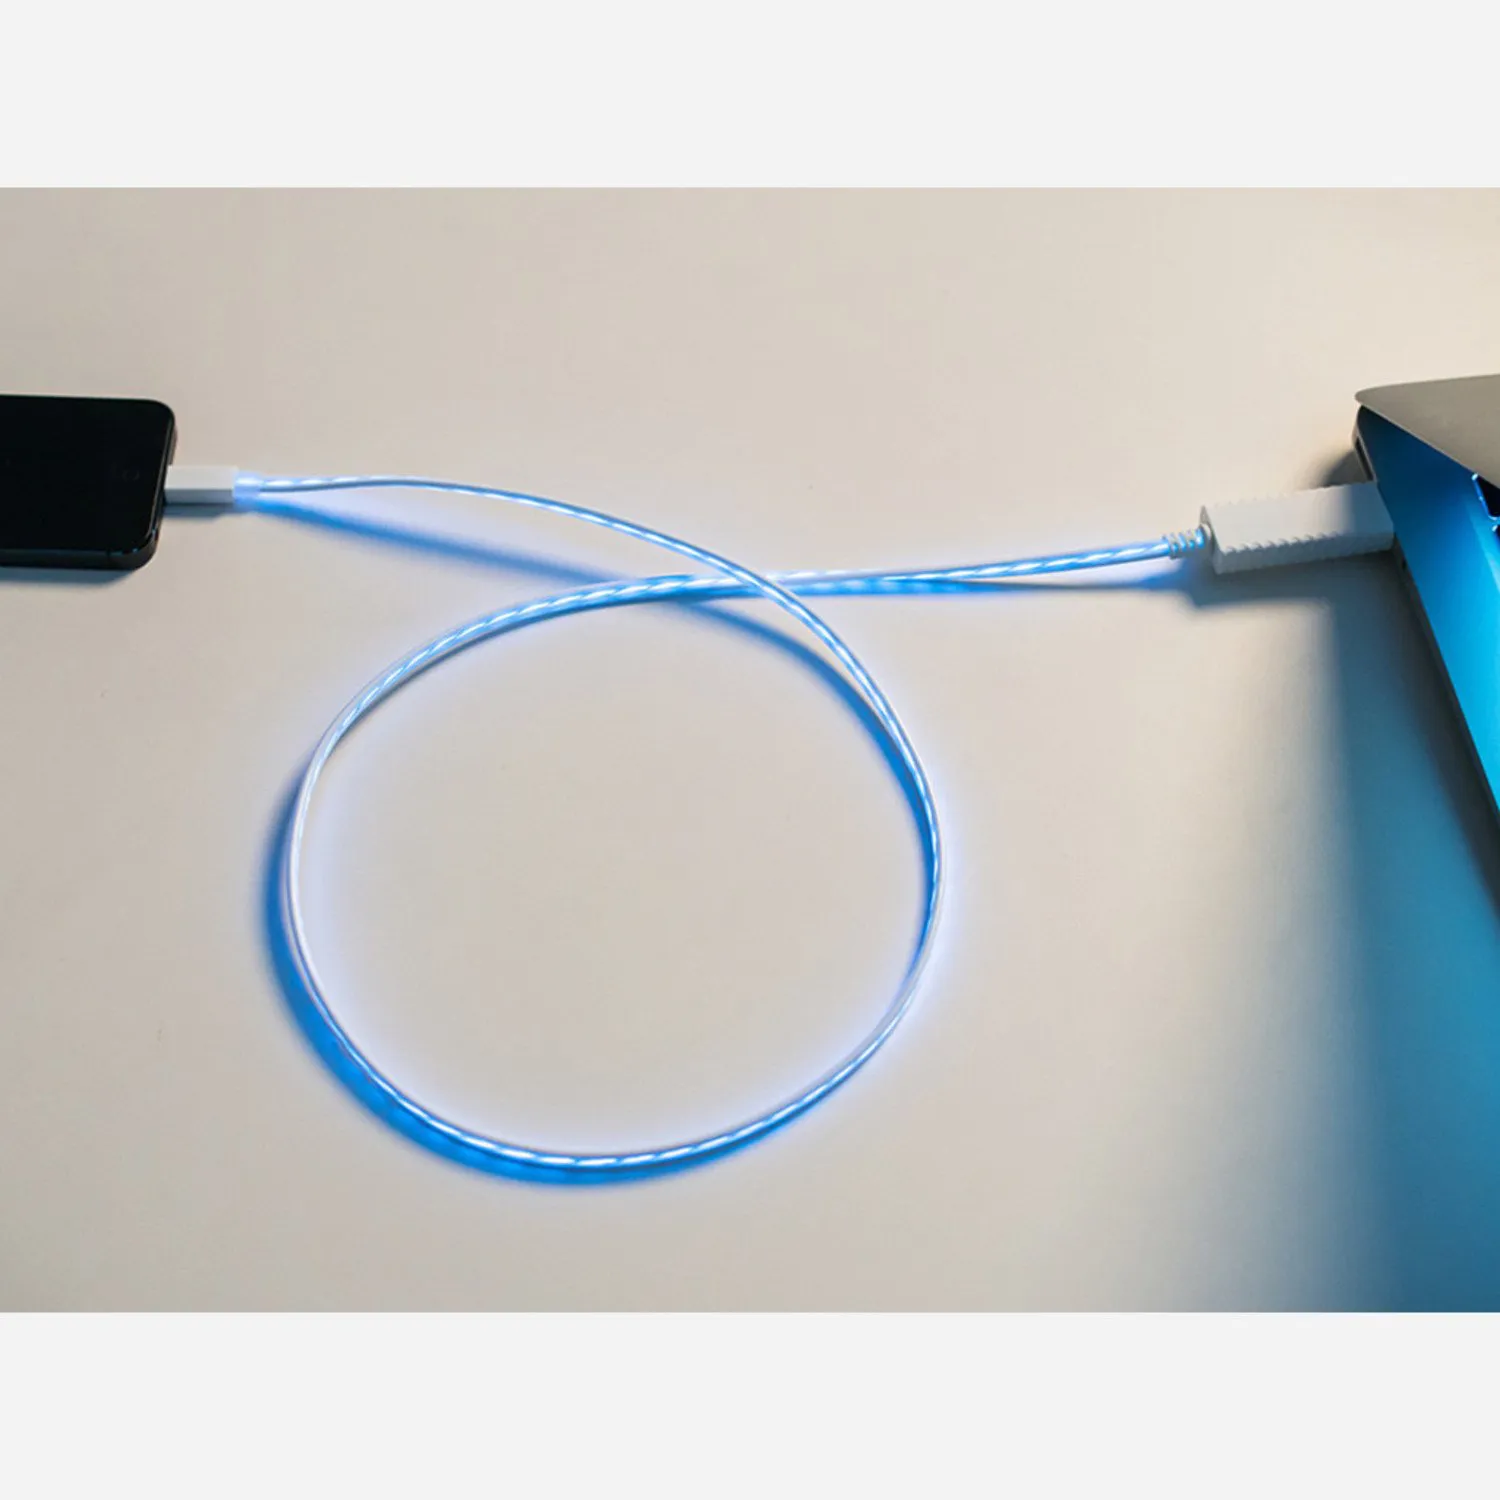 Photo of Flowing Effect iOS Lightning Cable - White w/Aqua EL